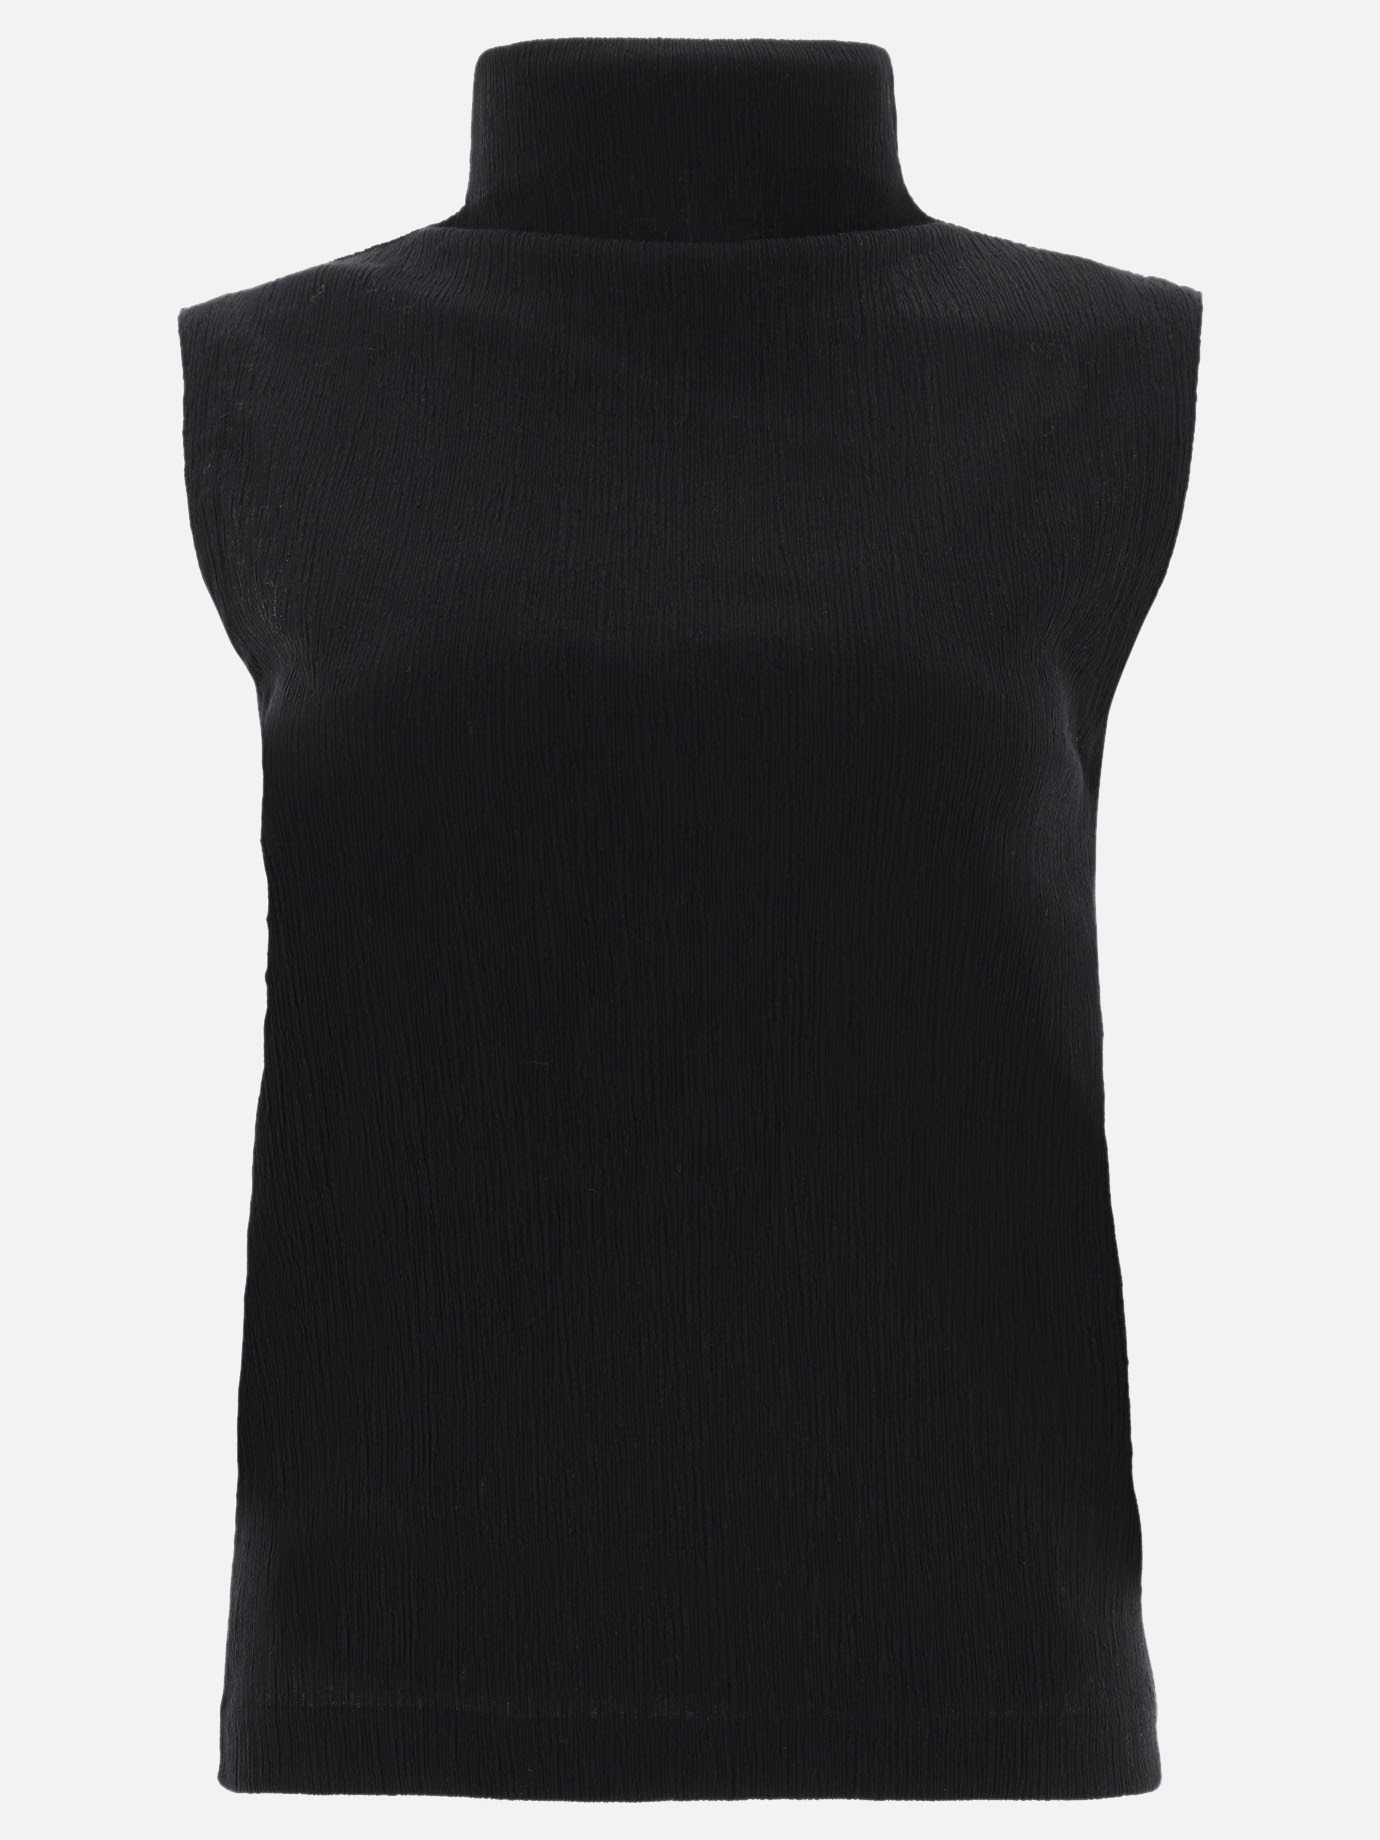 Sleeveless top with high neck